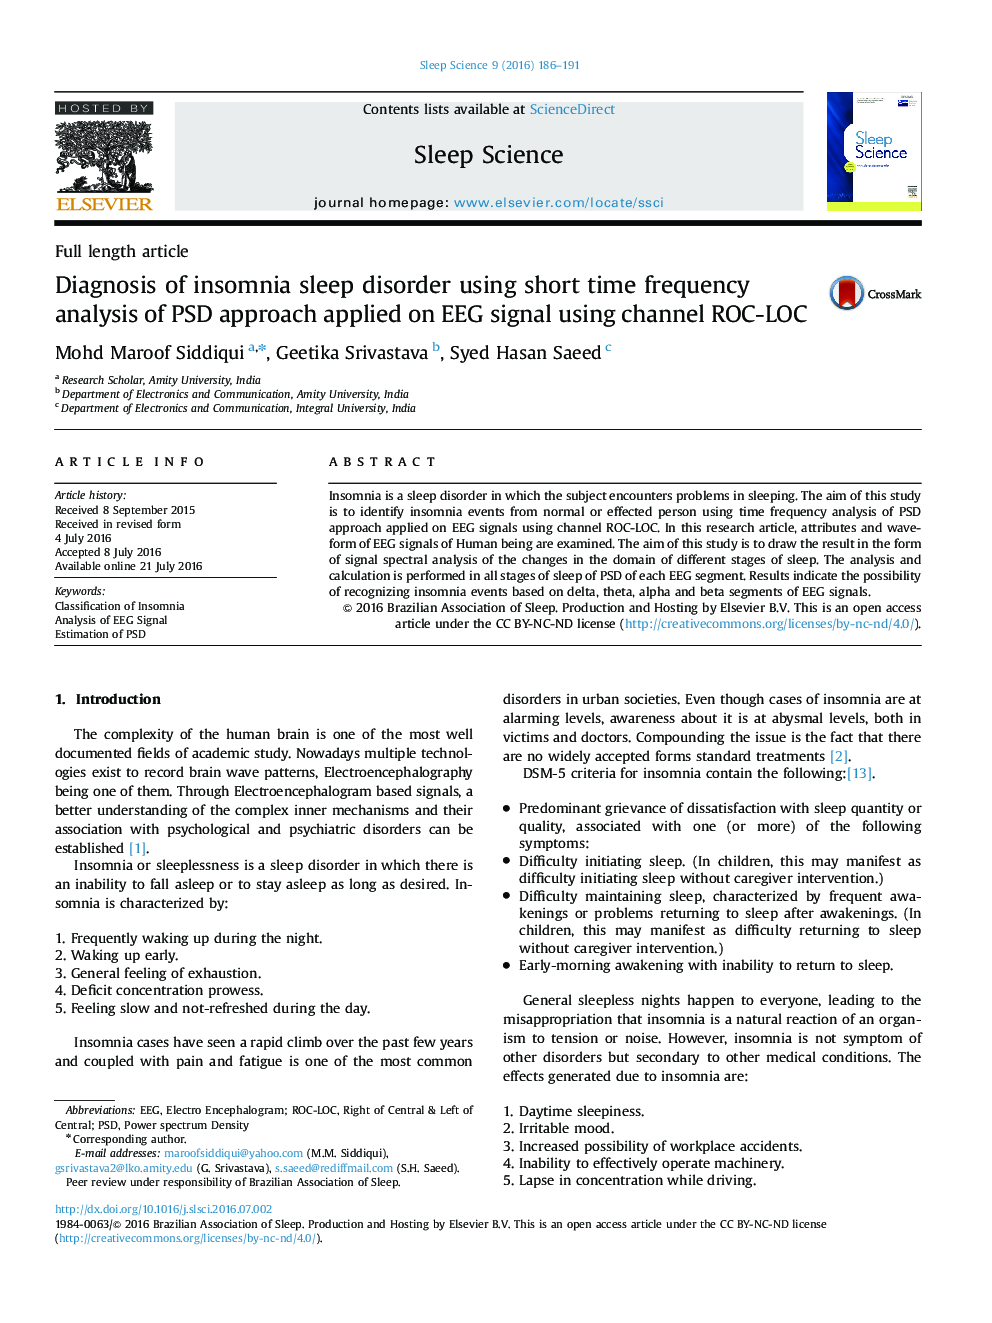 Full length articleDiagnosis of insomnia sleep disorder using short time frequency analysis of PSD approach applied on EEG signal using channel ROC-LOC